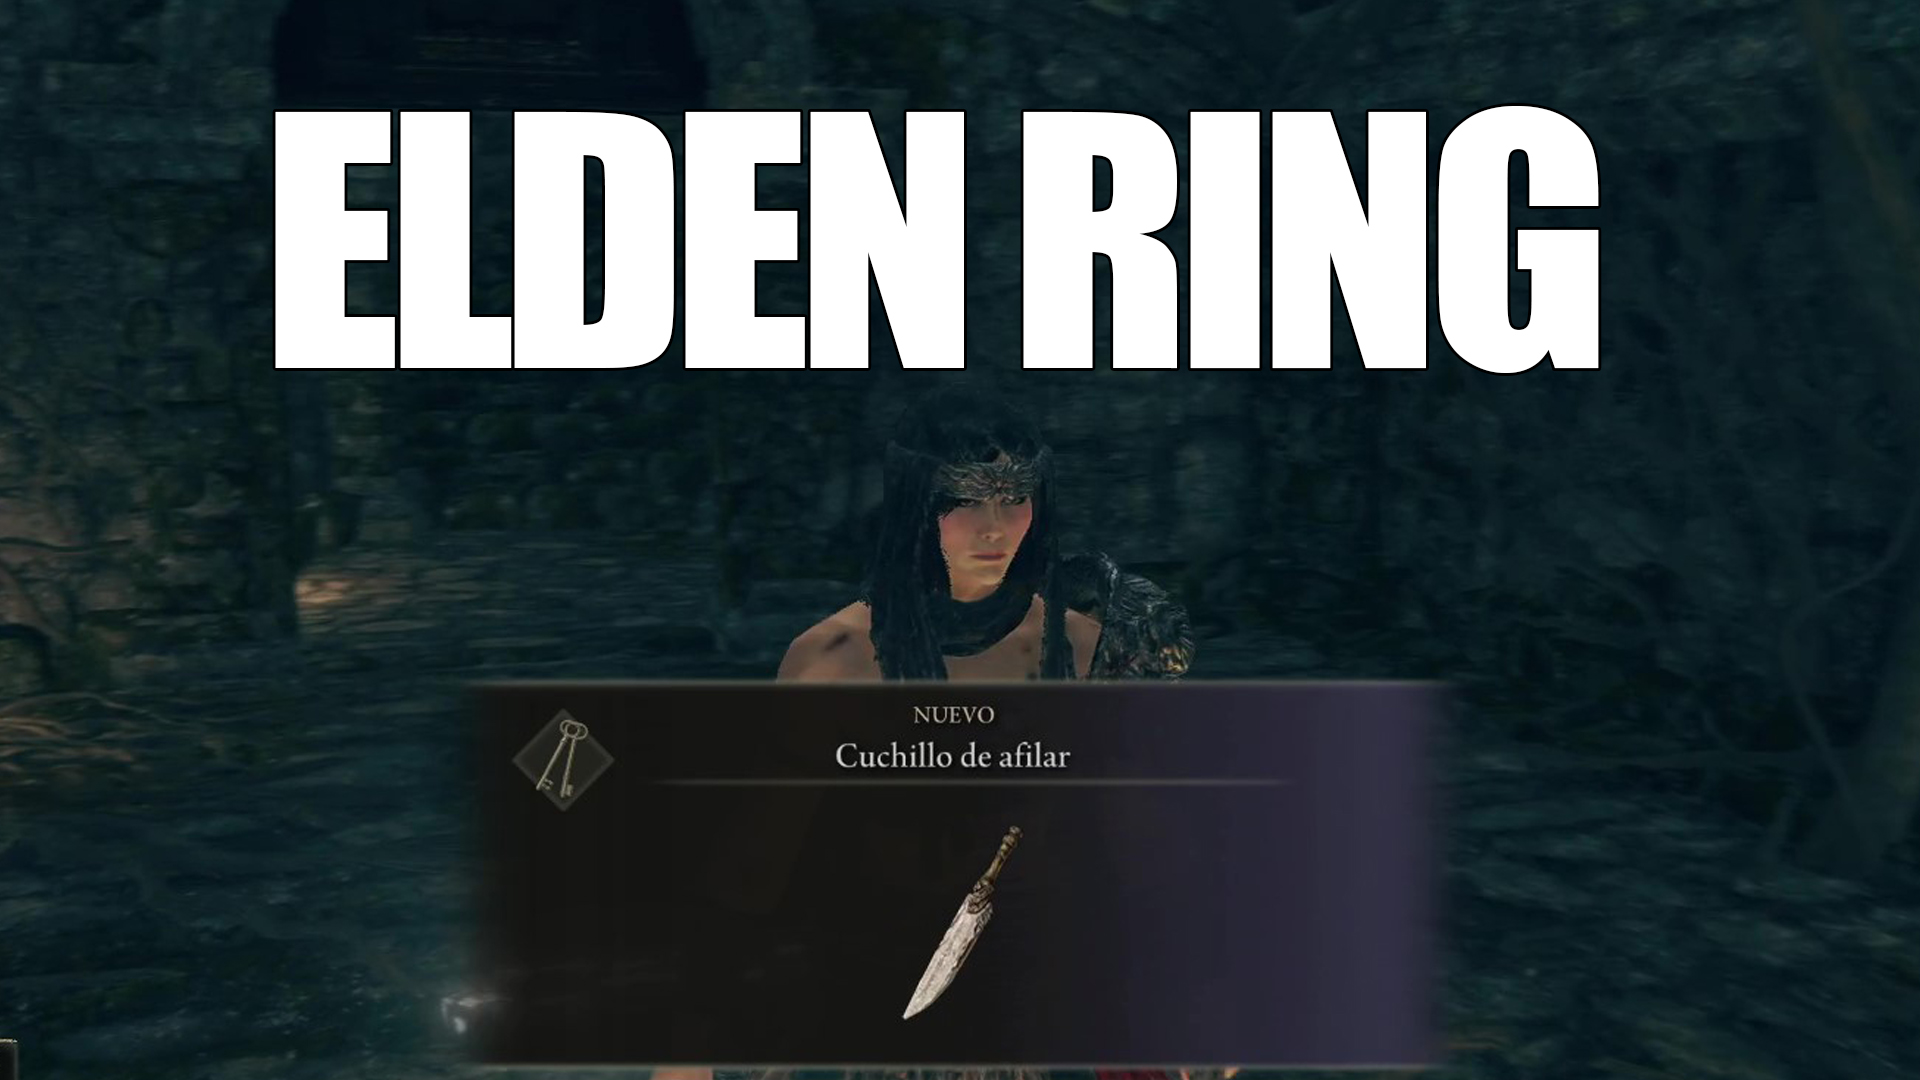 Elden Ring - Where to find the Sharpening Knife